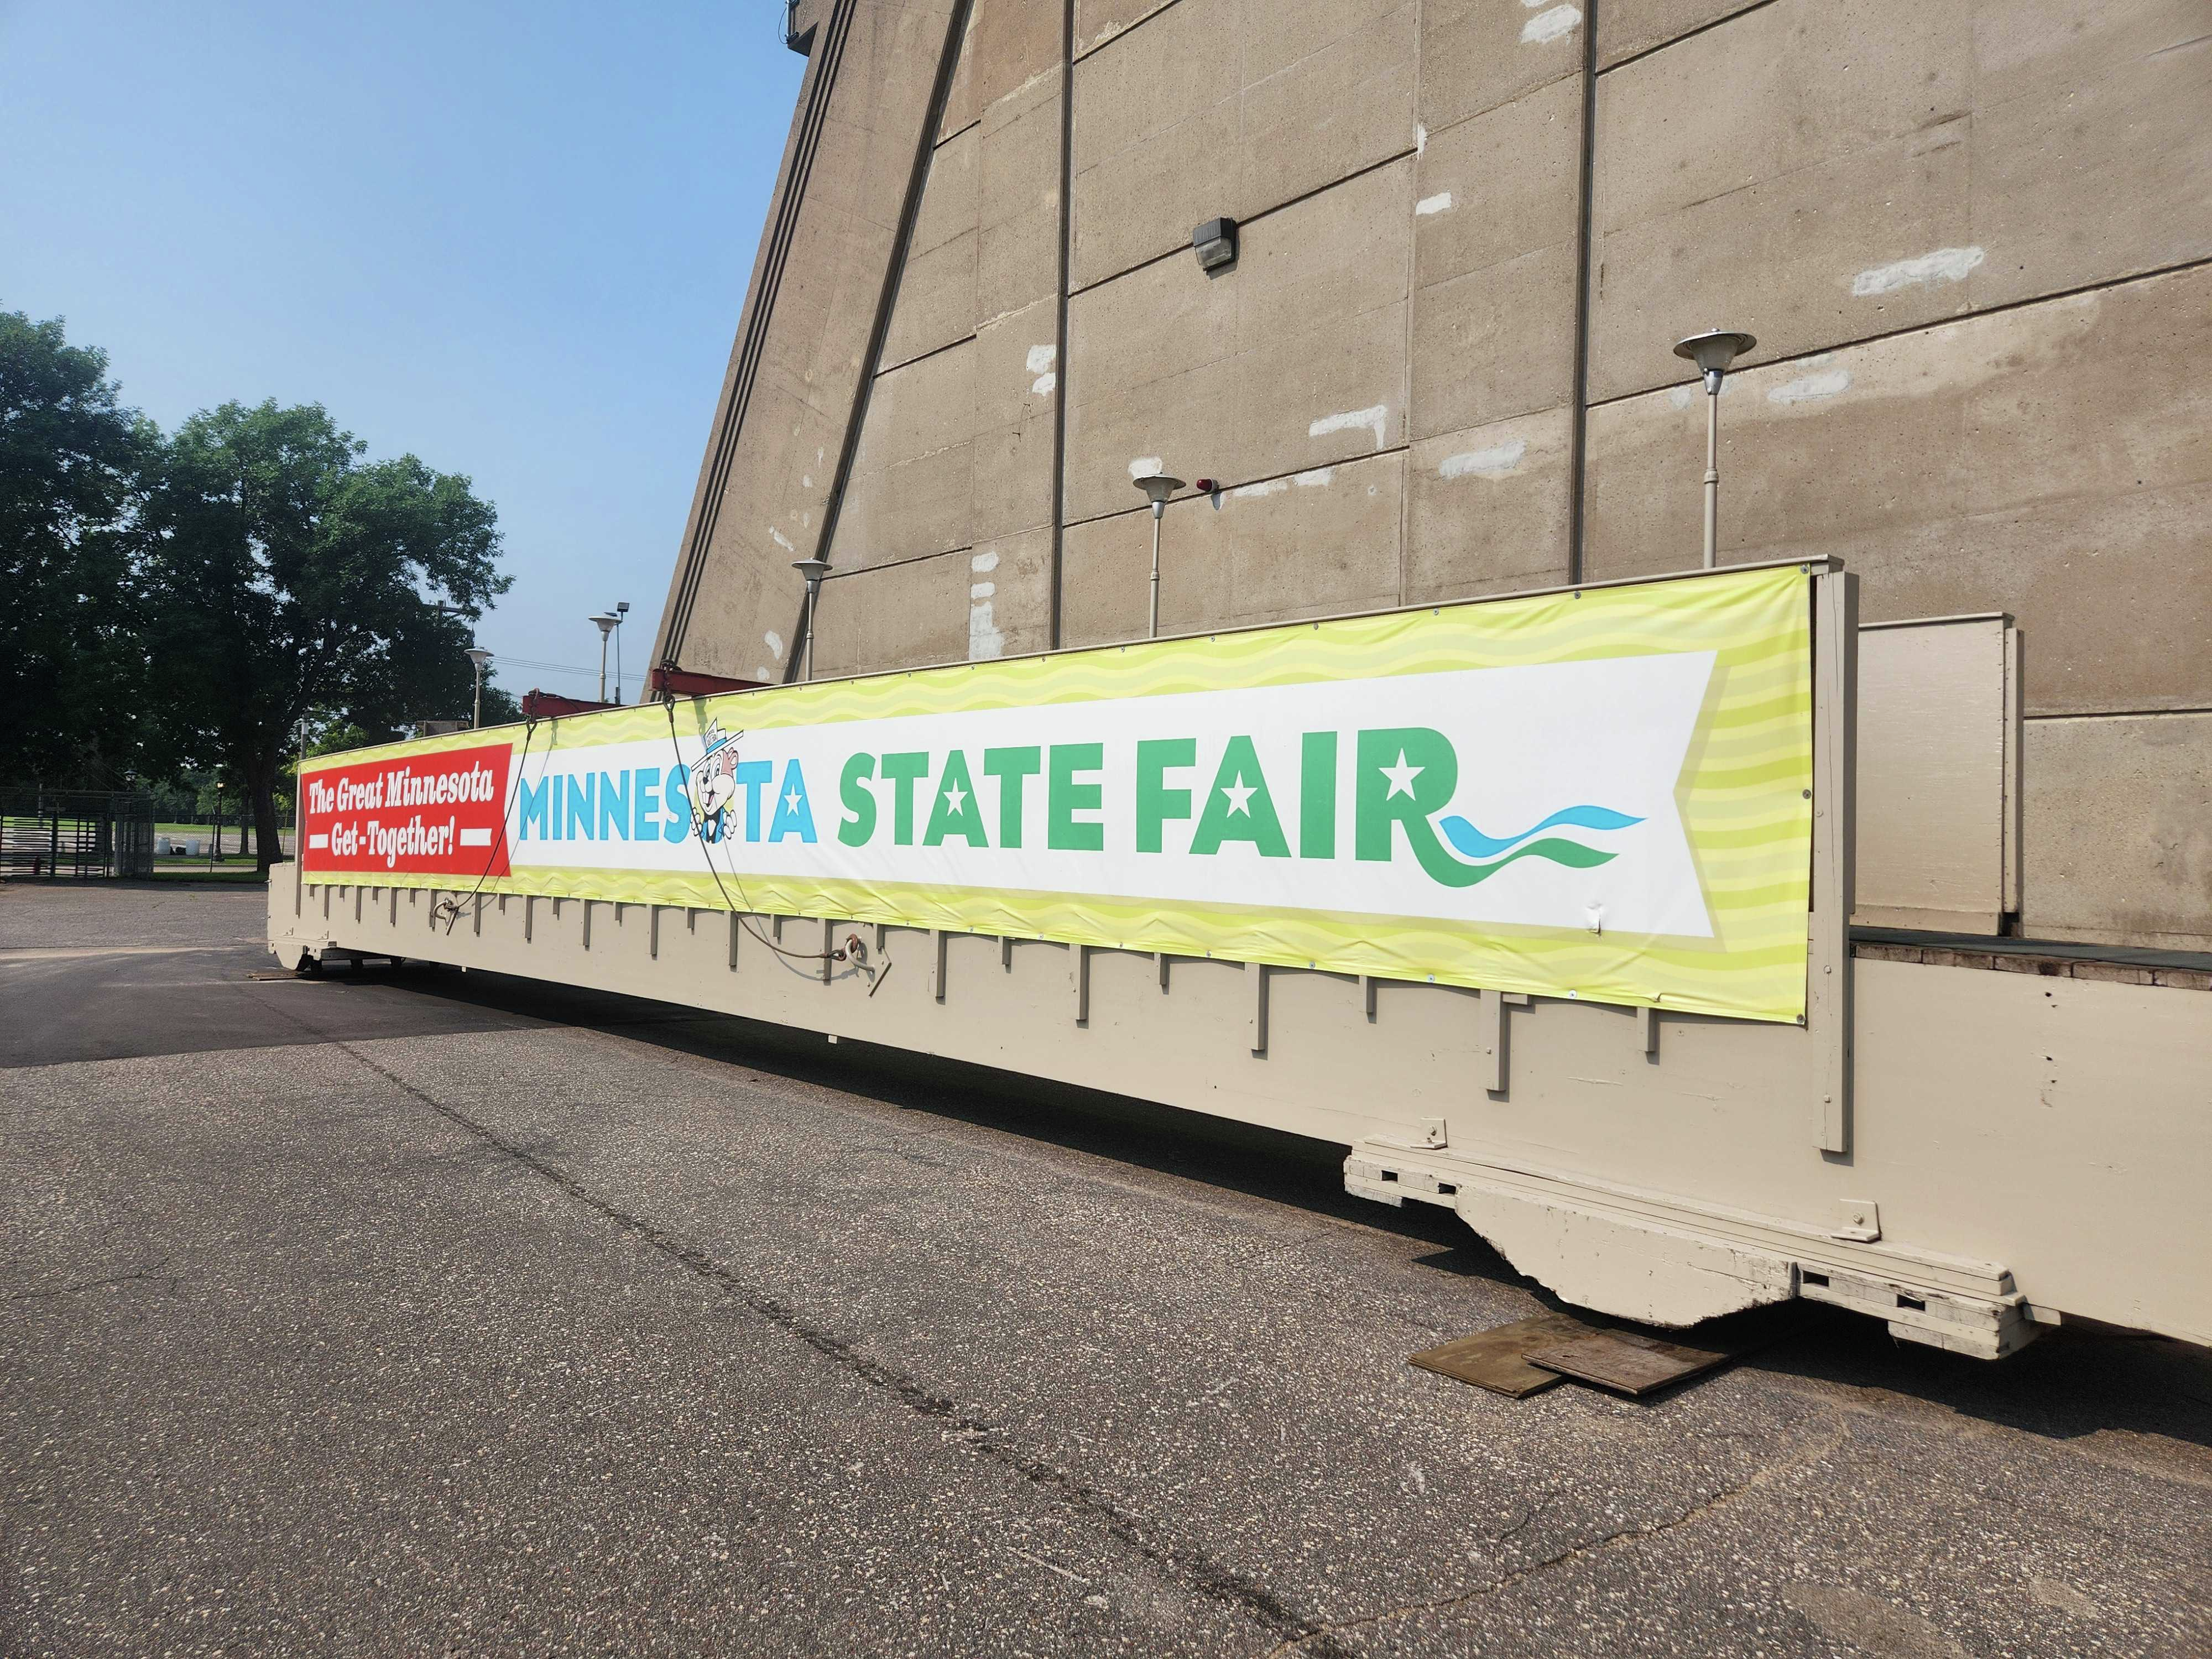 One month until the State Fair and there is plenty going on behind the scenes